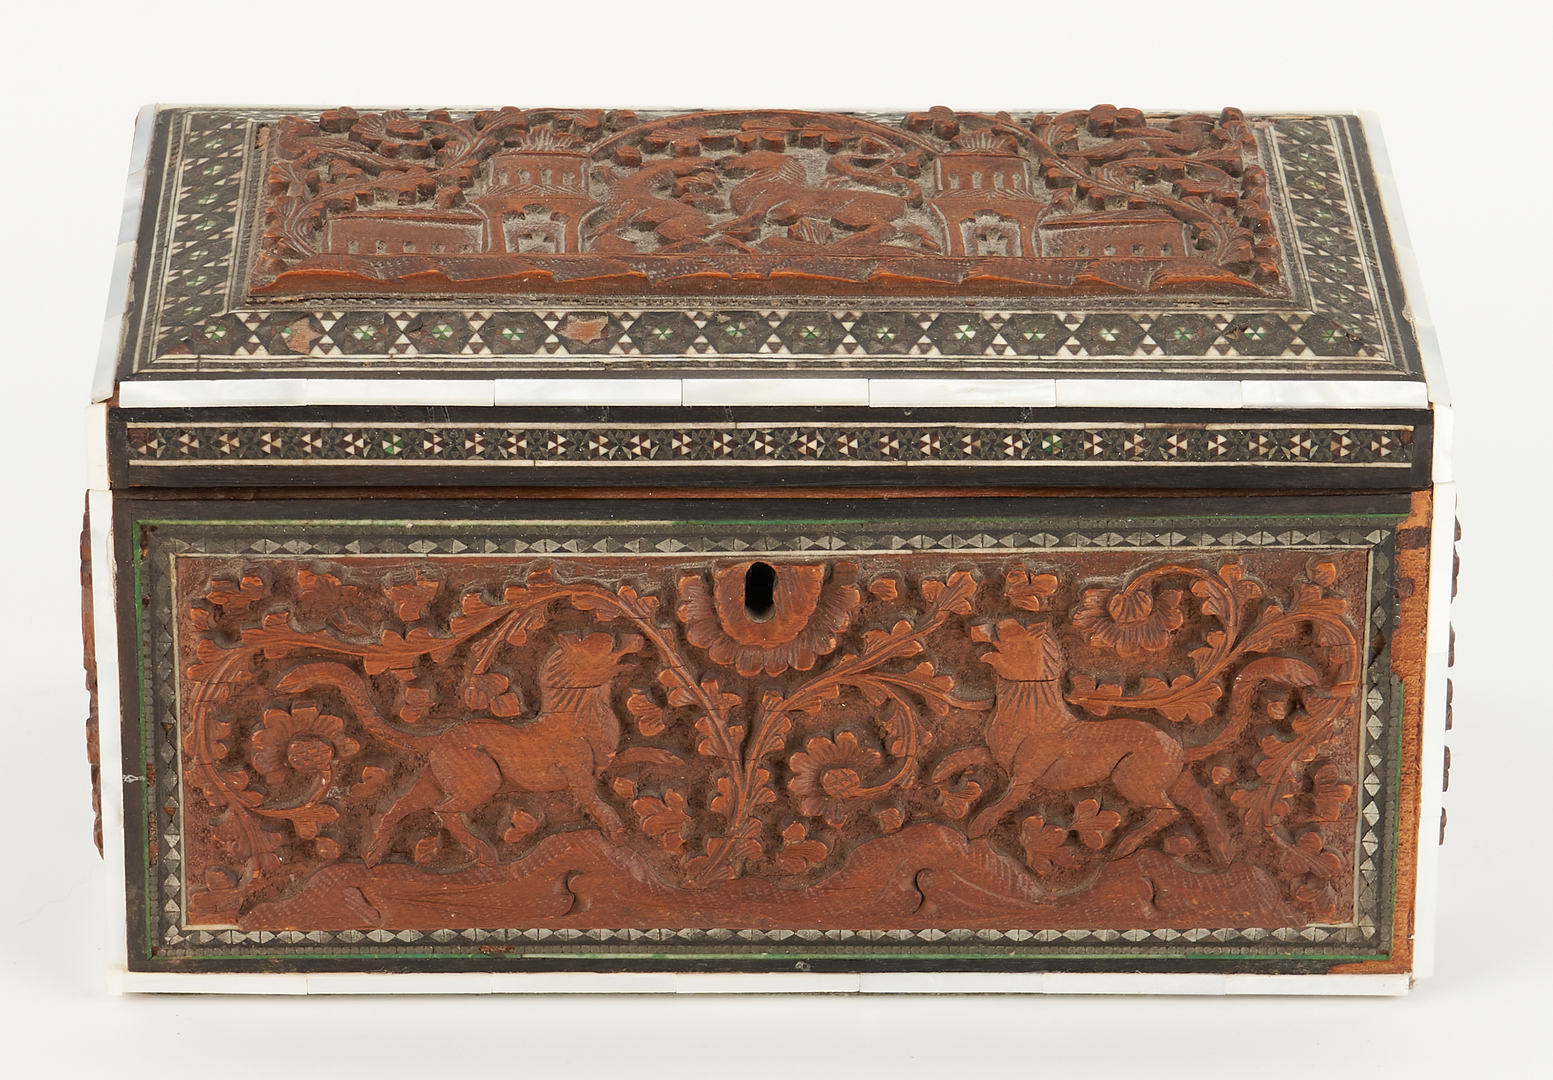 Lot 481: 2 Tea Caddies: Anglo Indian and Old Sheffield